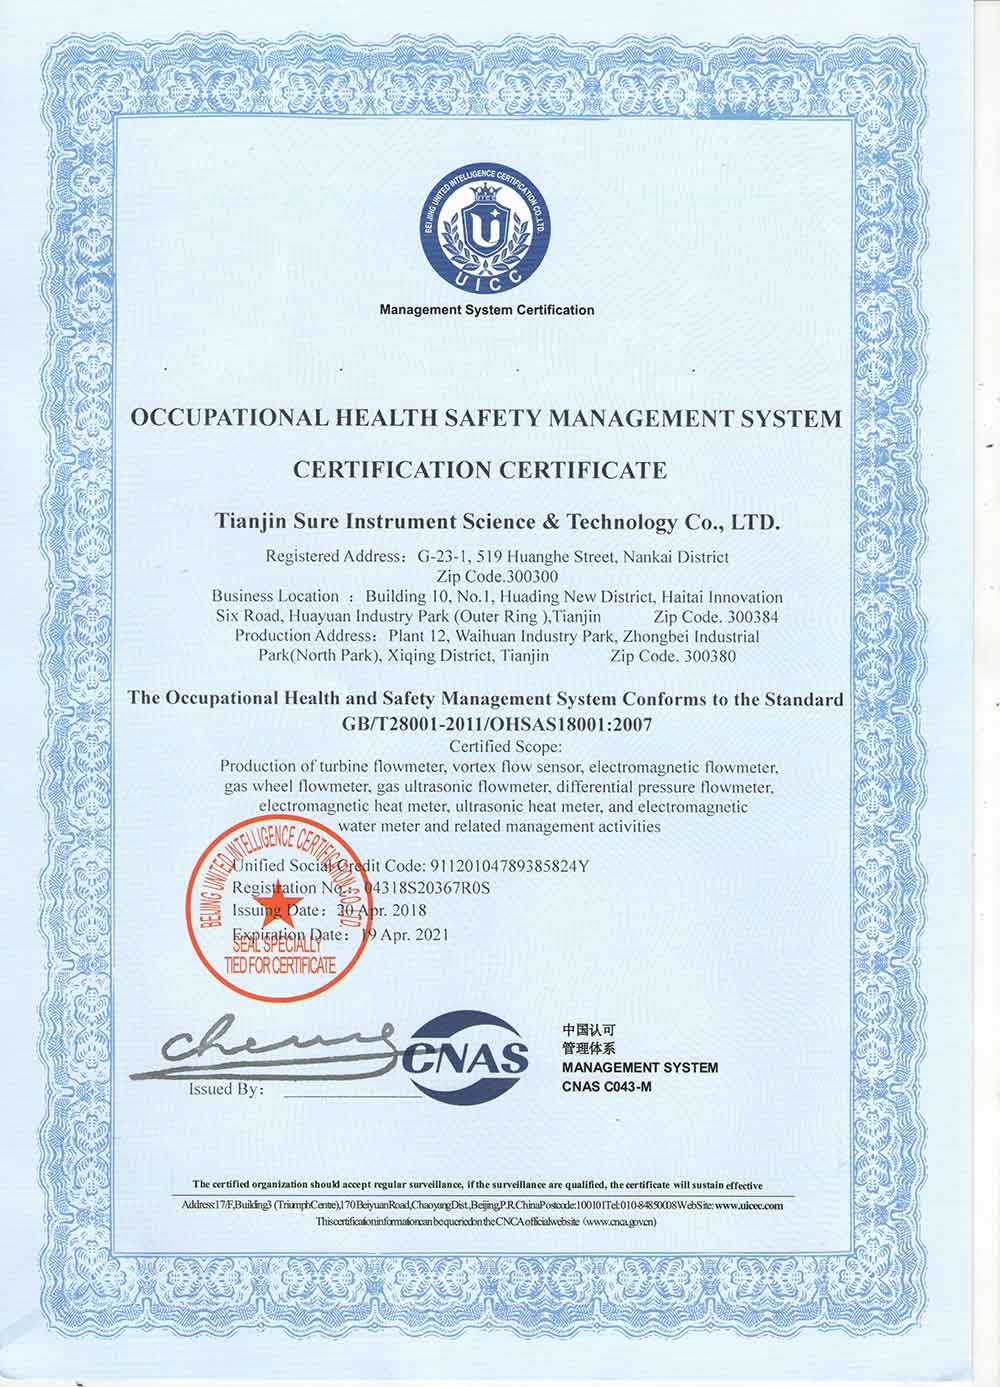  Occupational-Health-and-Safety-Management-Certificate--OHSAS18001